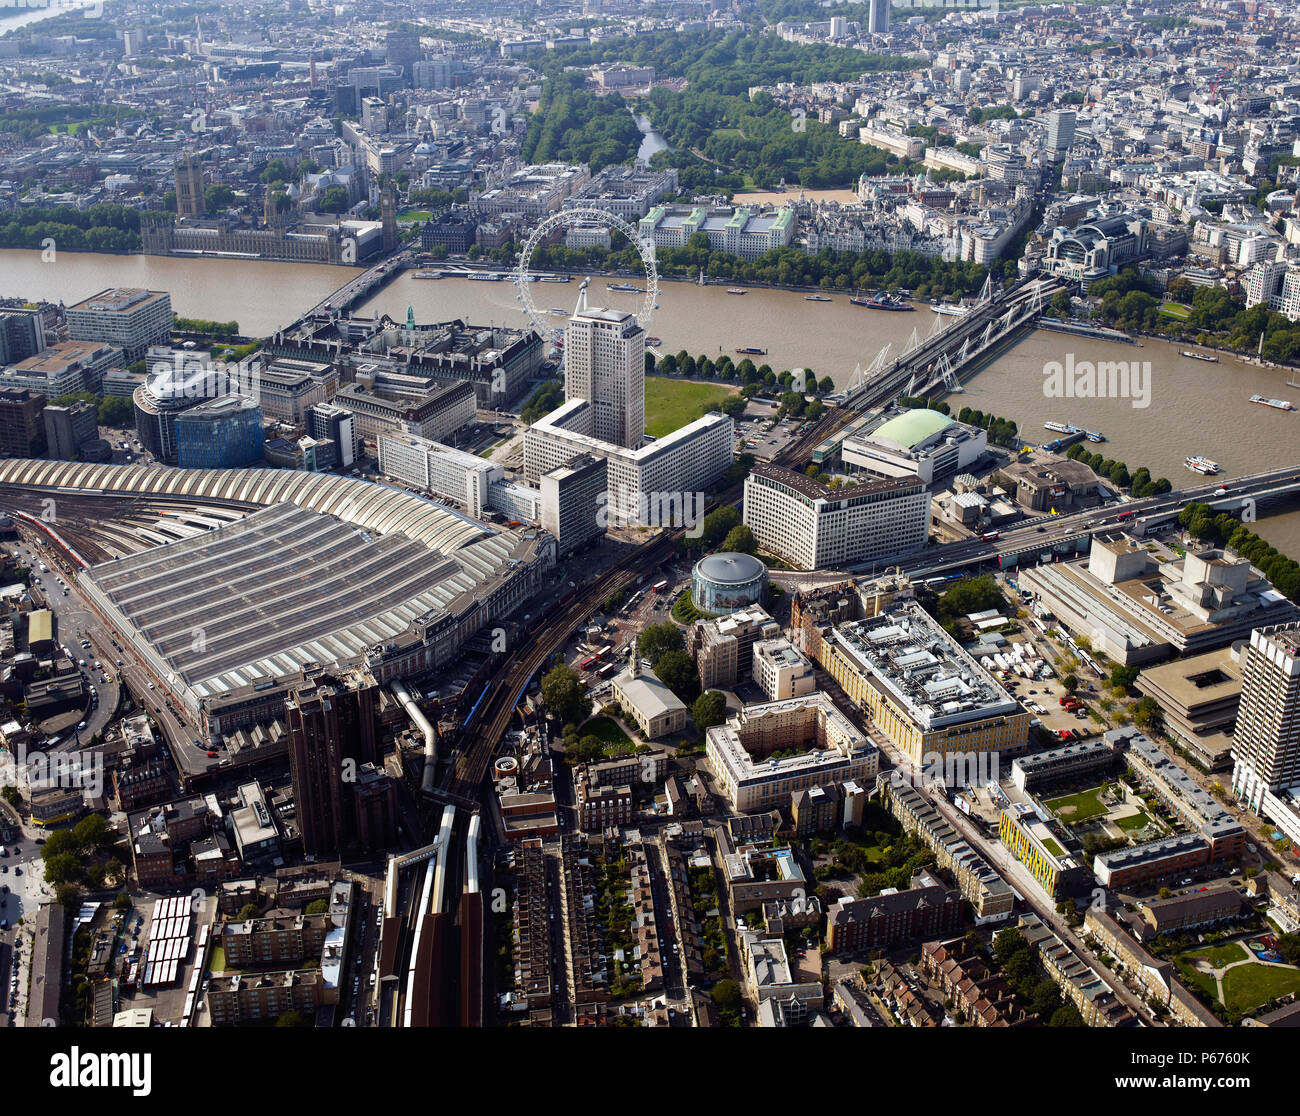 Aerial view of Waterloo Station, London, UK. Stock Photo